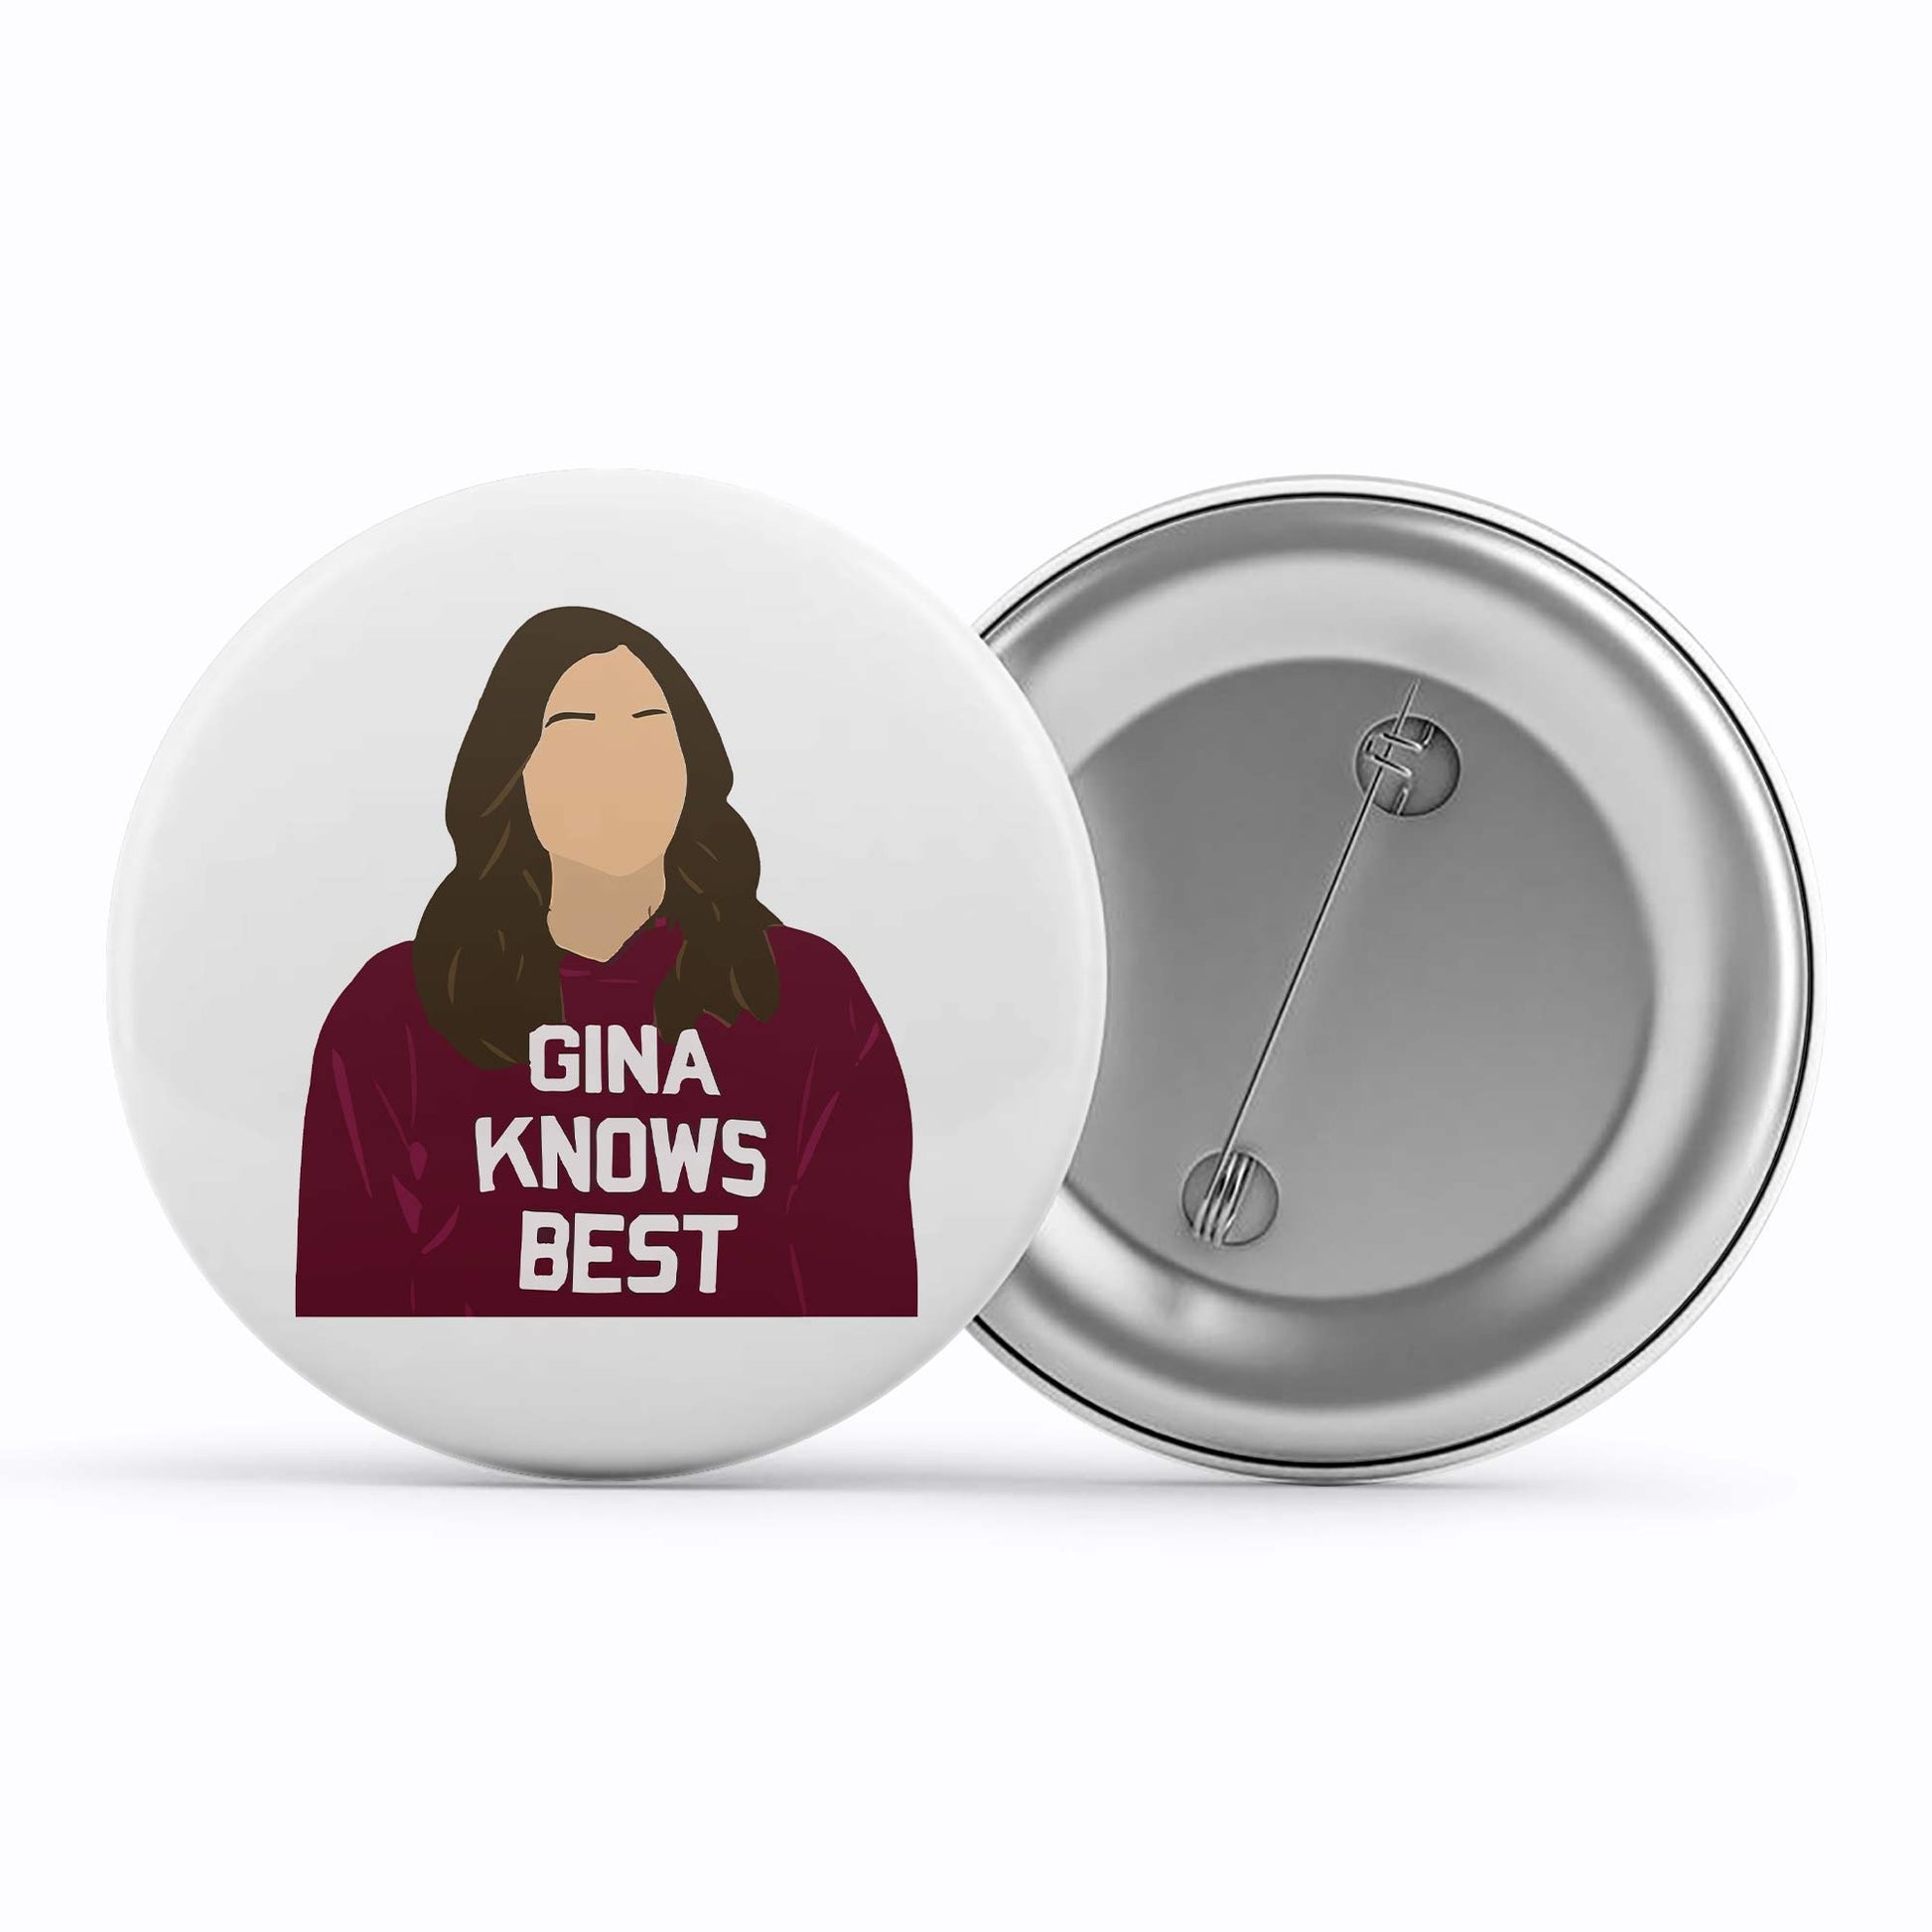 brooklyn nine-nine gina knows best badge pin button buy online india the banyan tee tbt men women girls boys unisex  detective jake peralta terry charles boyle gina linetti andy samberg merchandise clothing acceessories